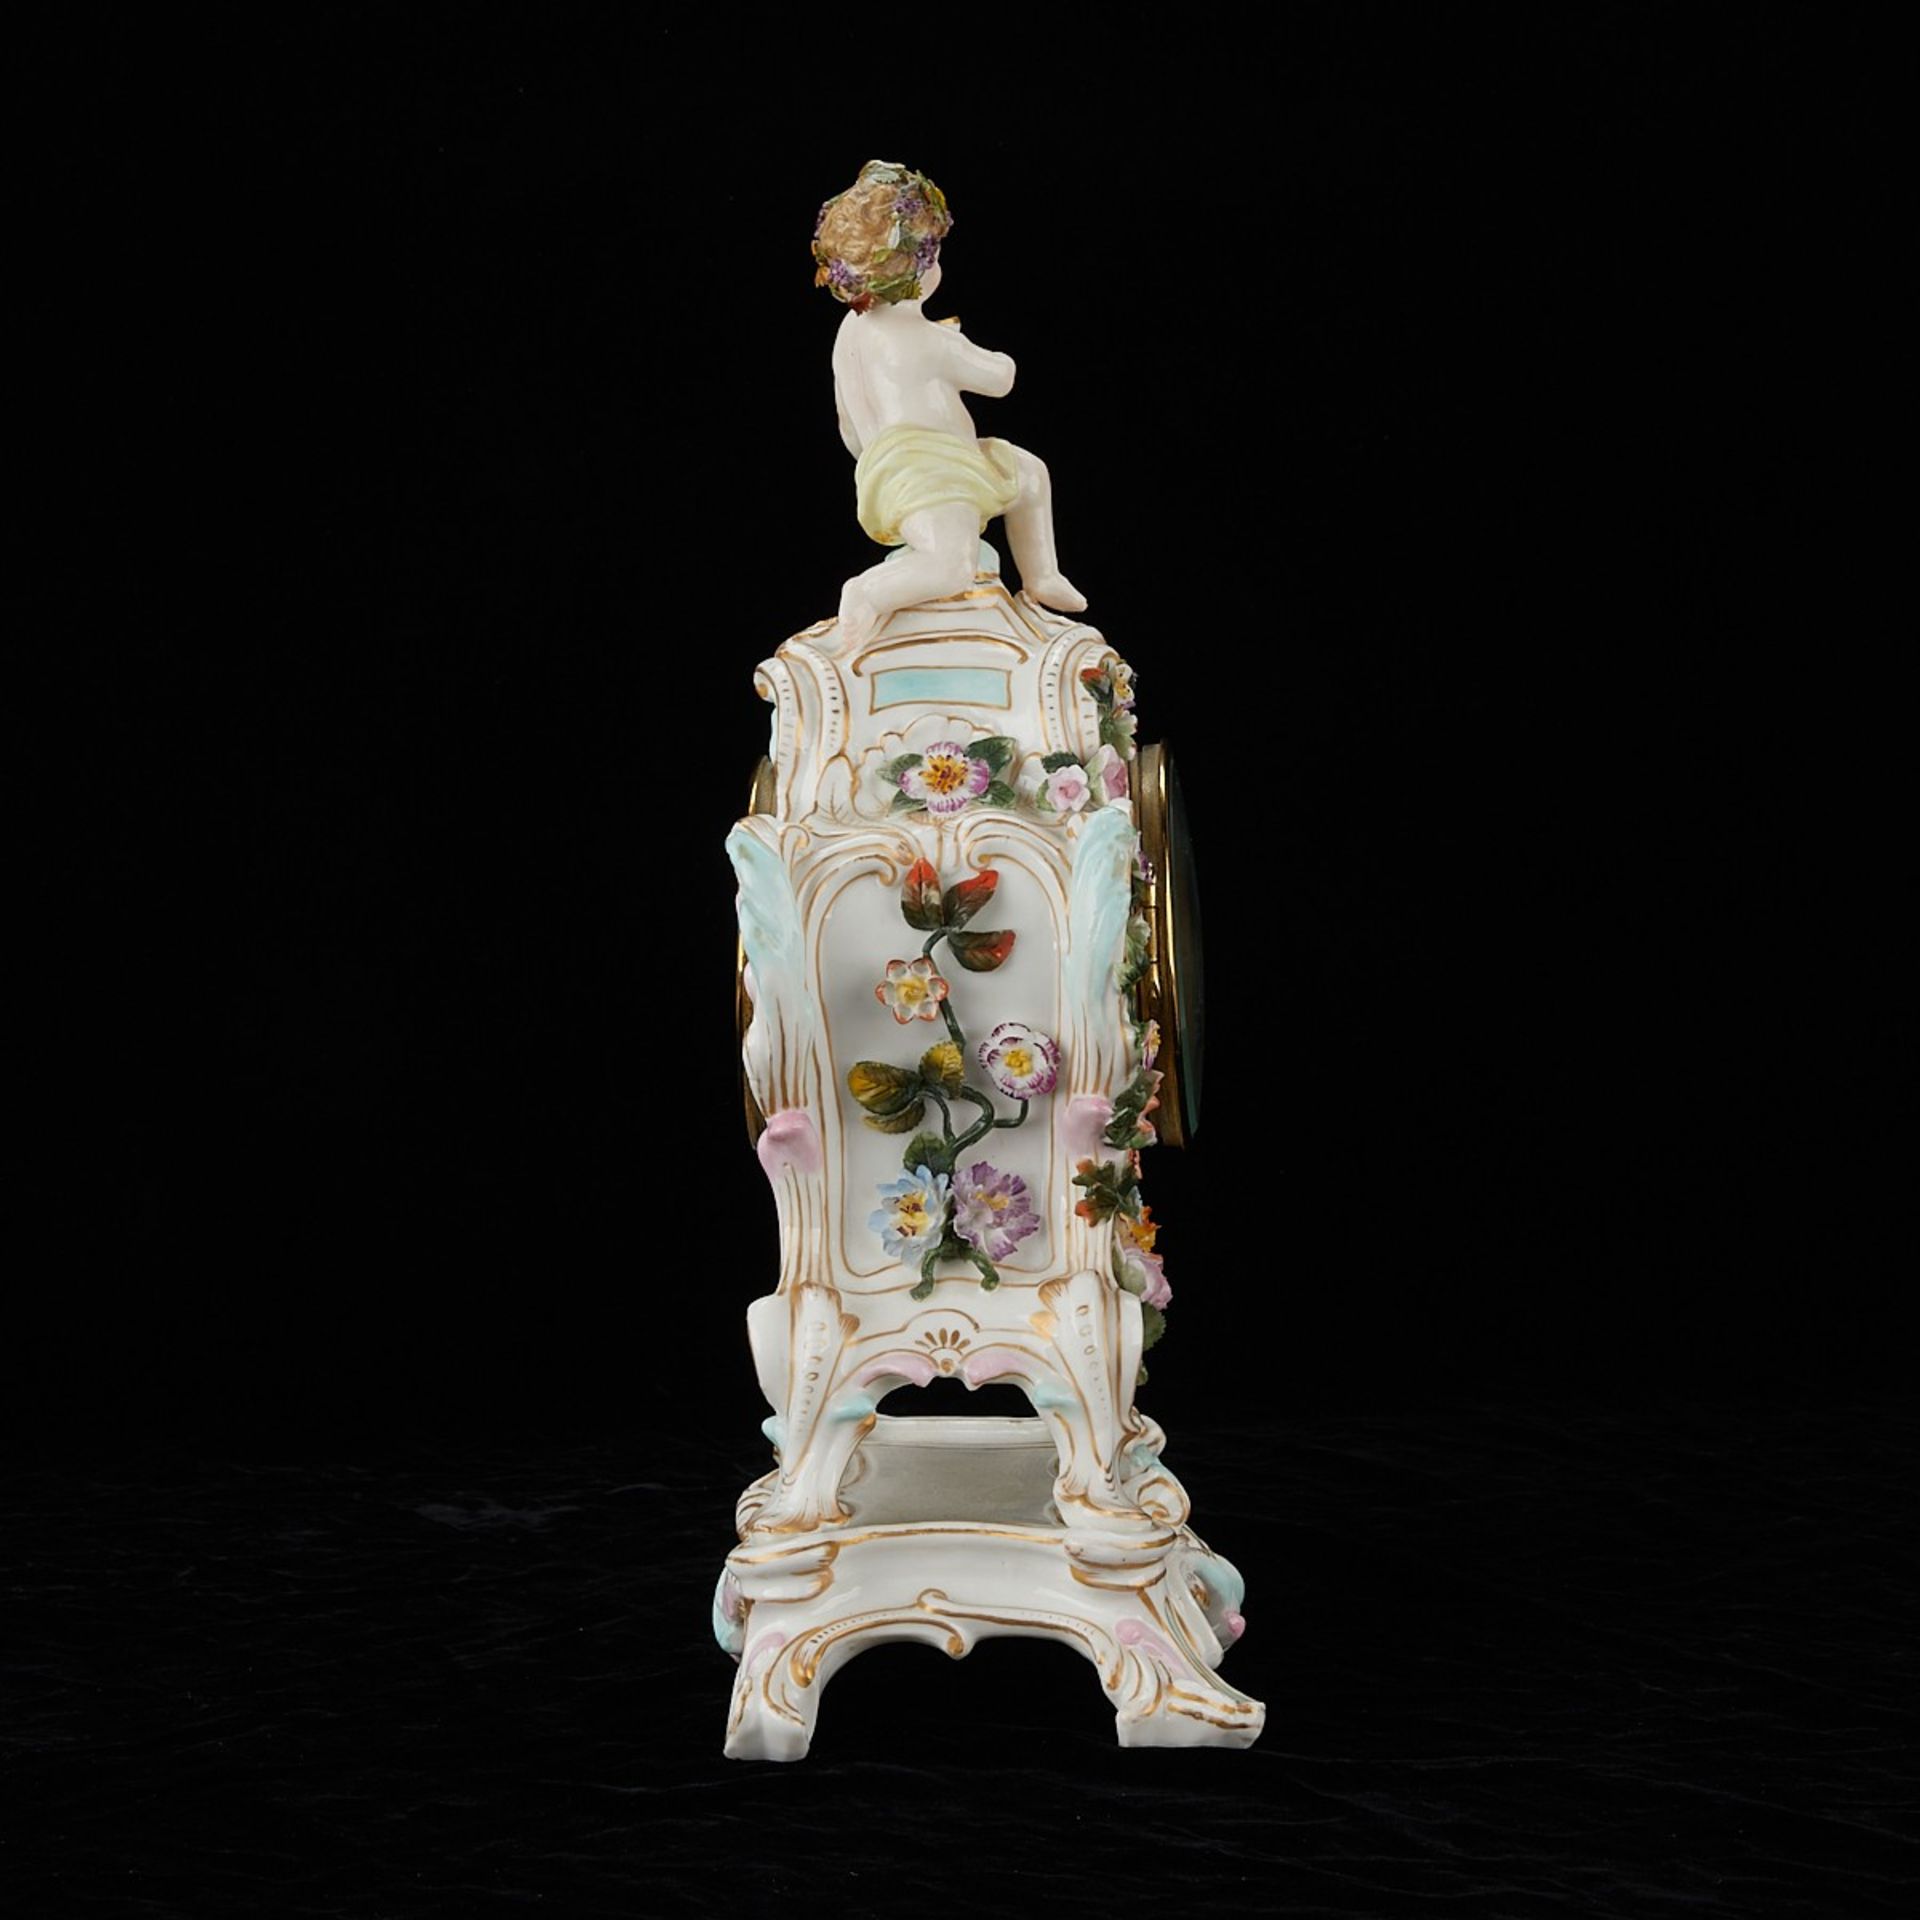 Dresden Porcelain Clock w/ Baby & Flowers - Image 5 of 14